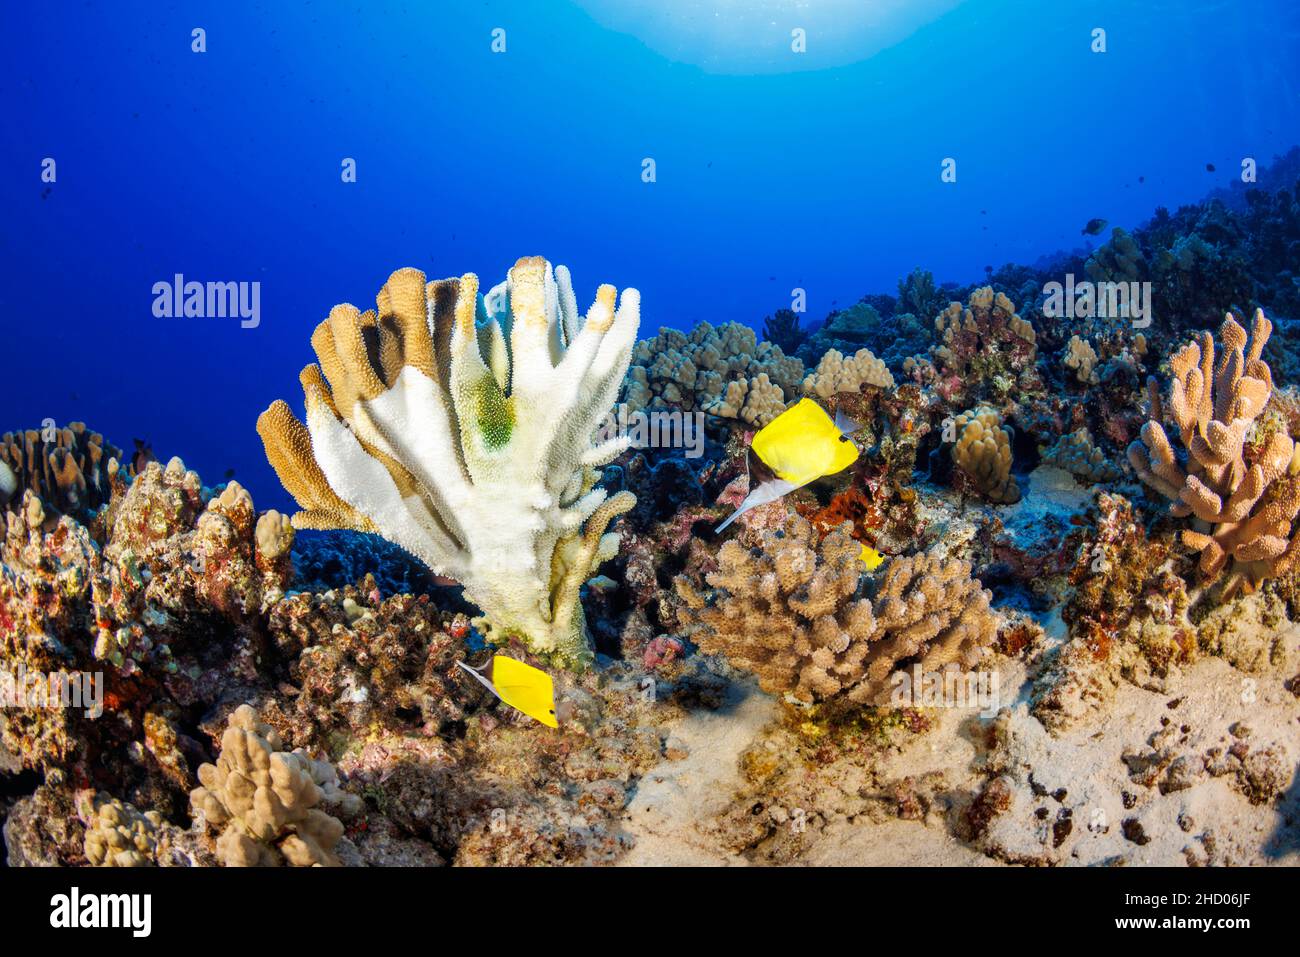 This image, shot in November 2021, shows coral bleaching on a stand of antler coral, Pocillopora eydouxi. The colonies of coral are affected by high w Stock Photo